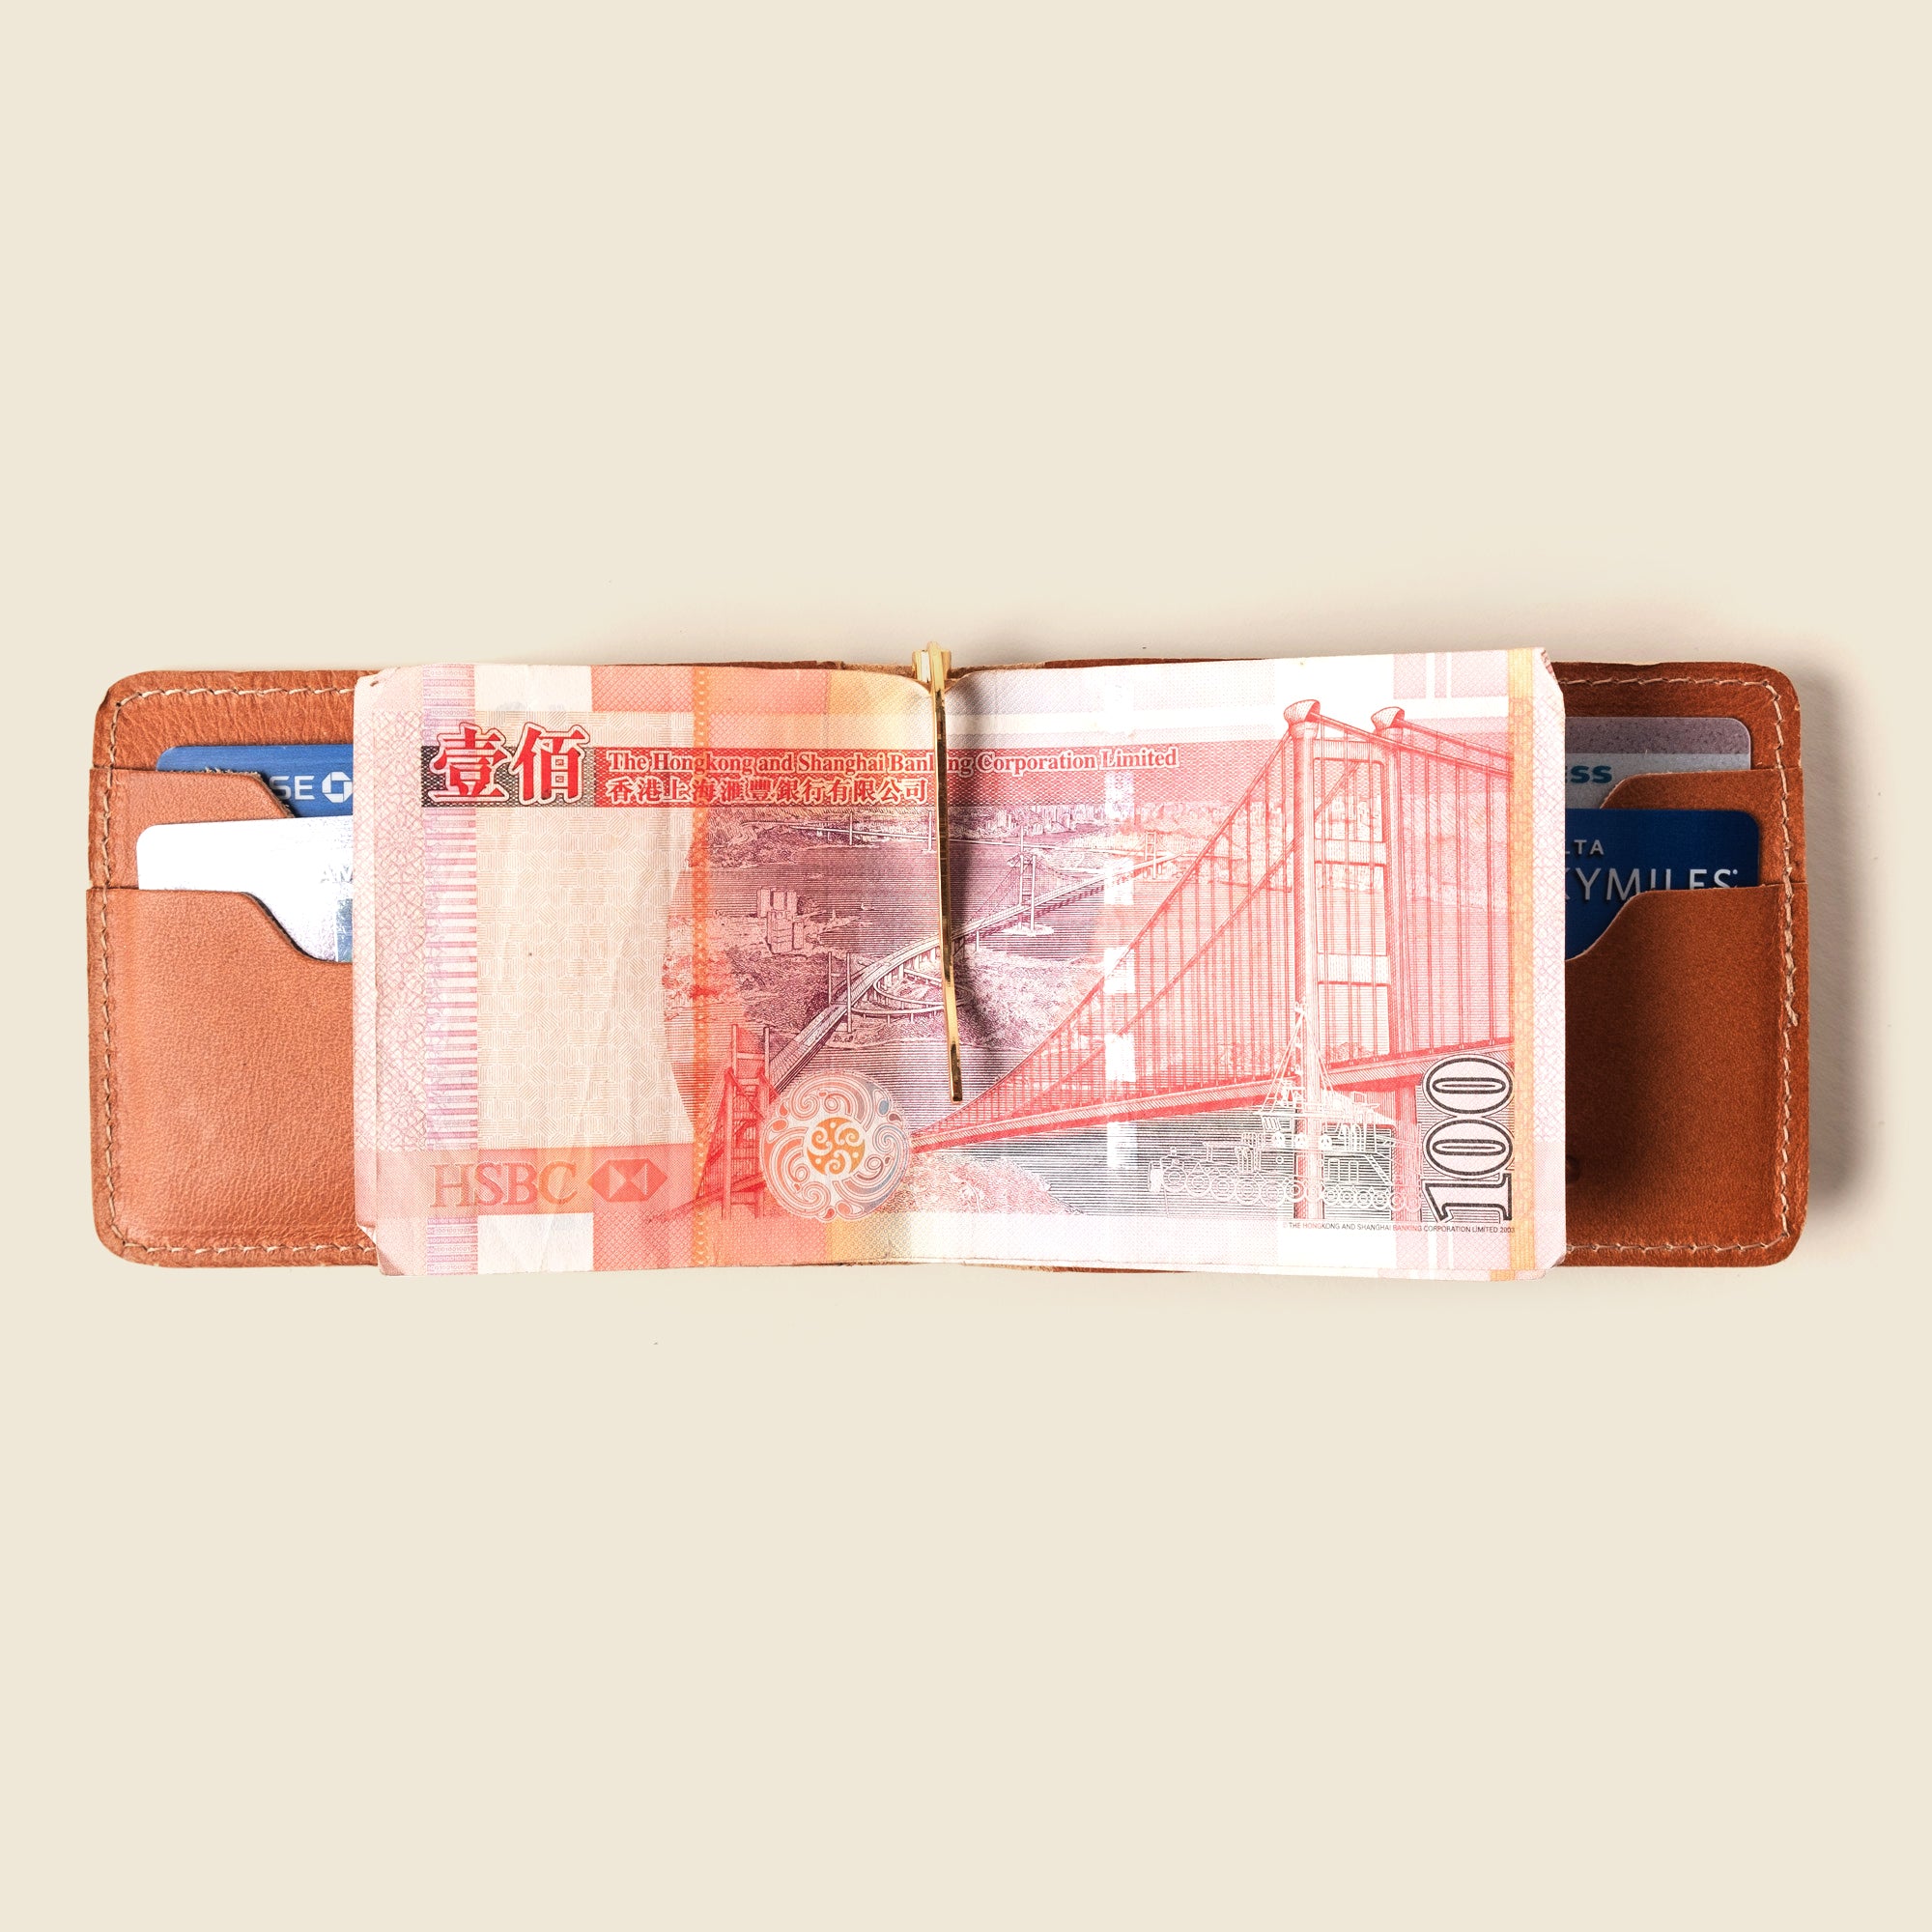 men's money clip wallet for Euros and other currency